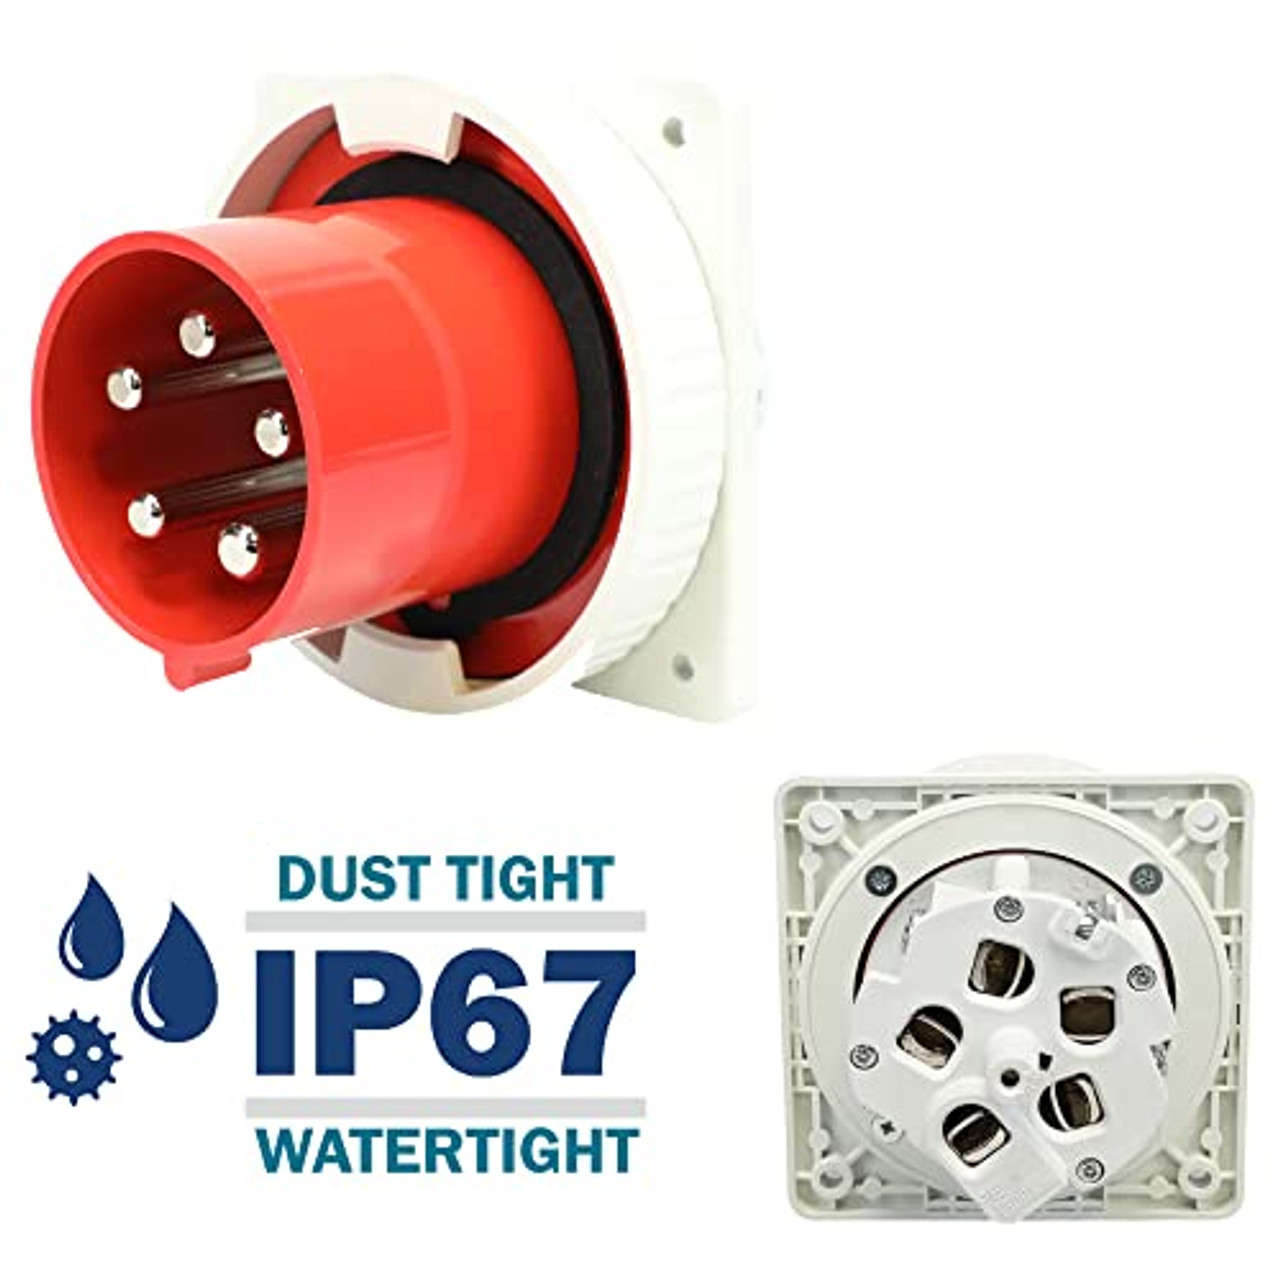 679519 Inlet carries an environmental rating of IP67 Watertight